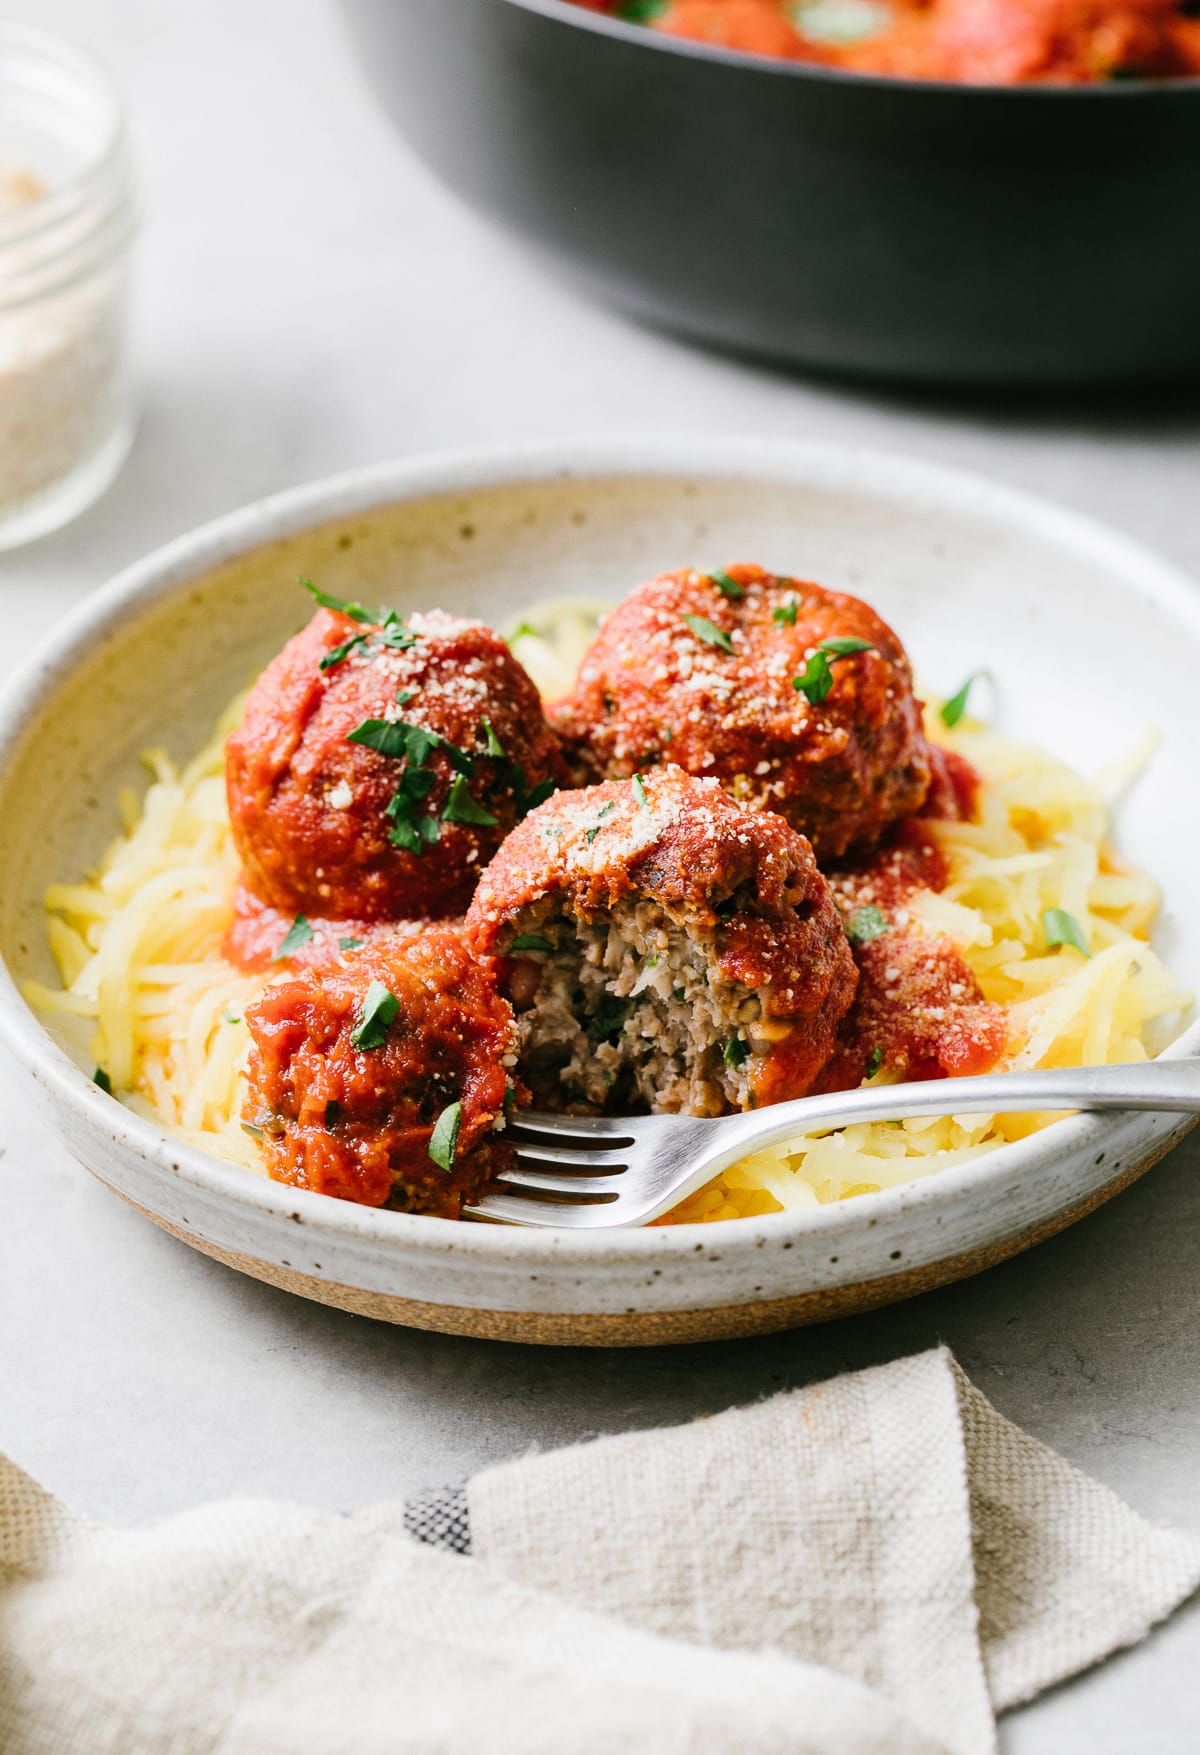 side angle view of spaghetti and vegan meatballs in a bowl with fork holding a bite.